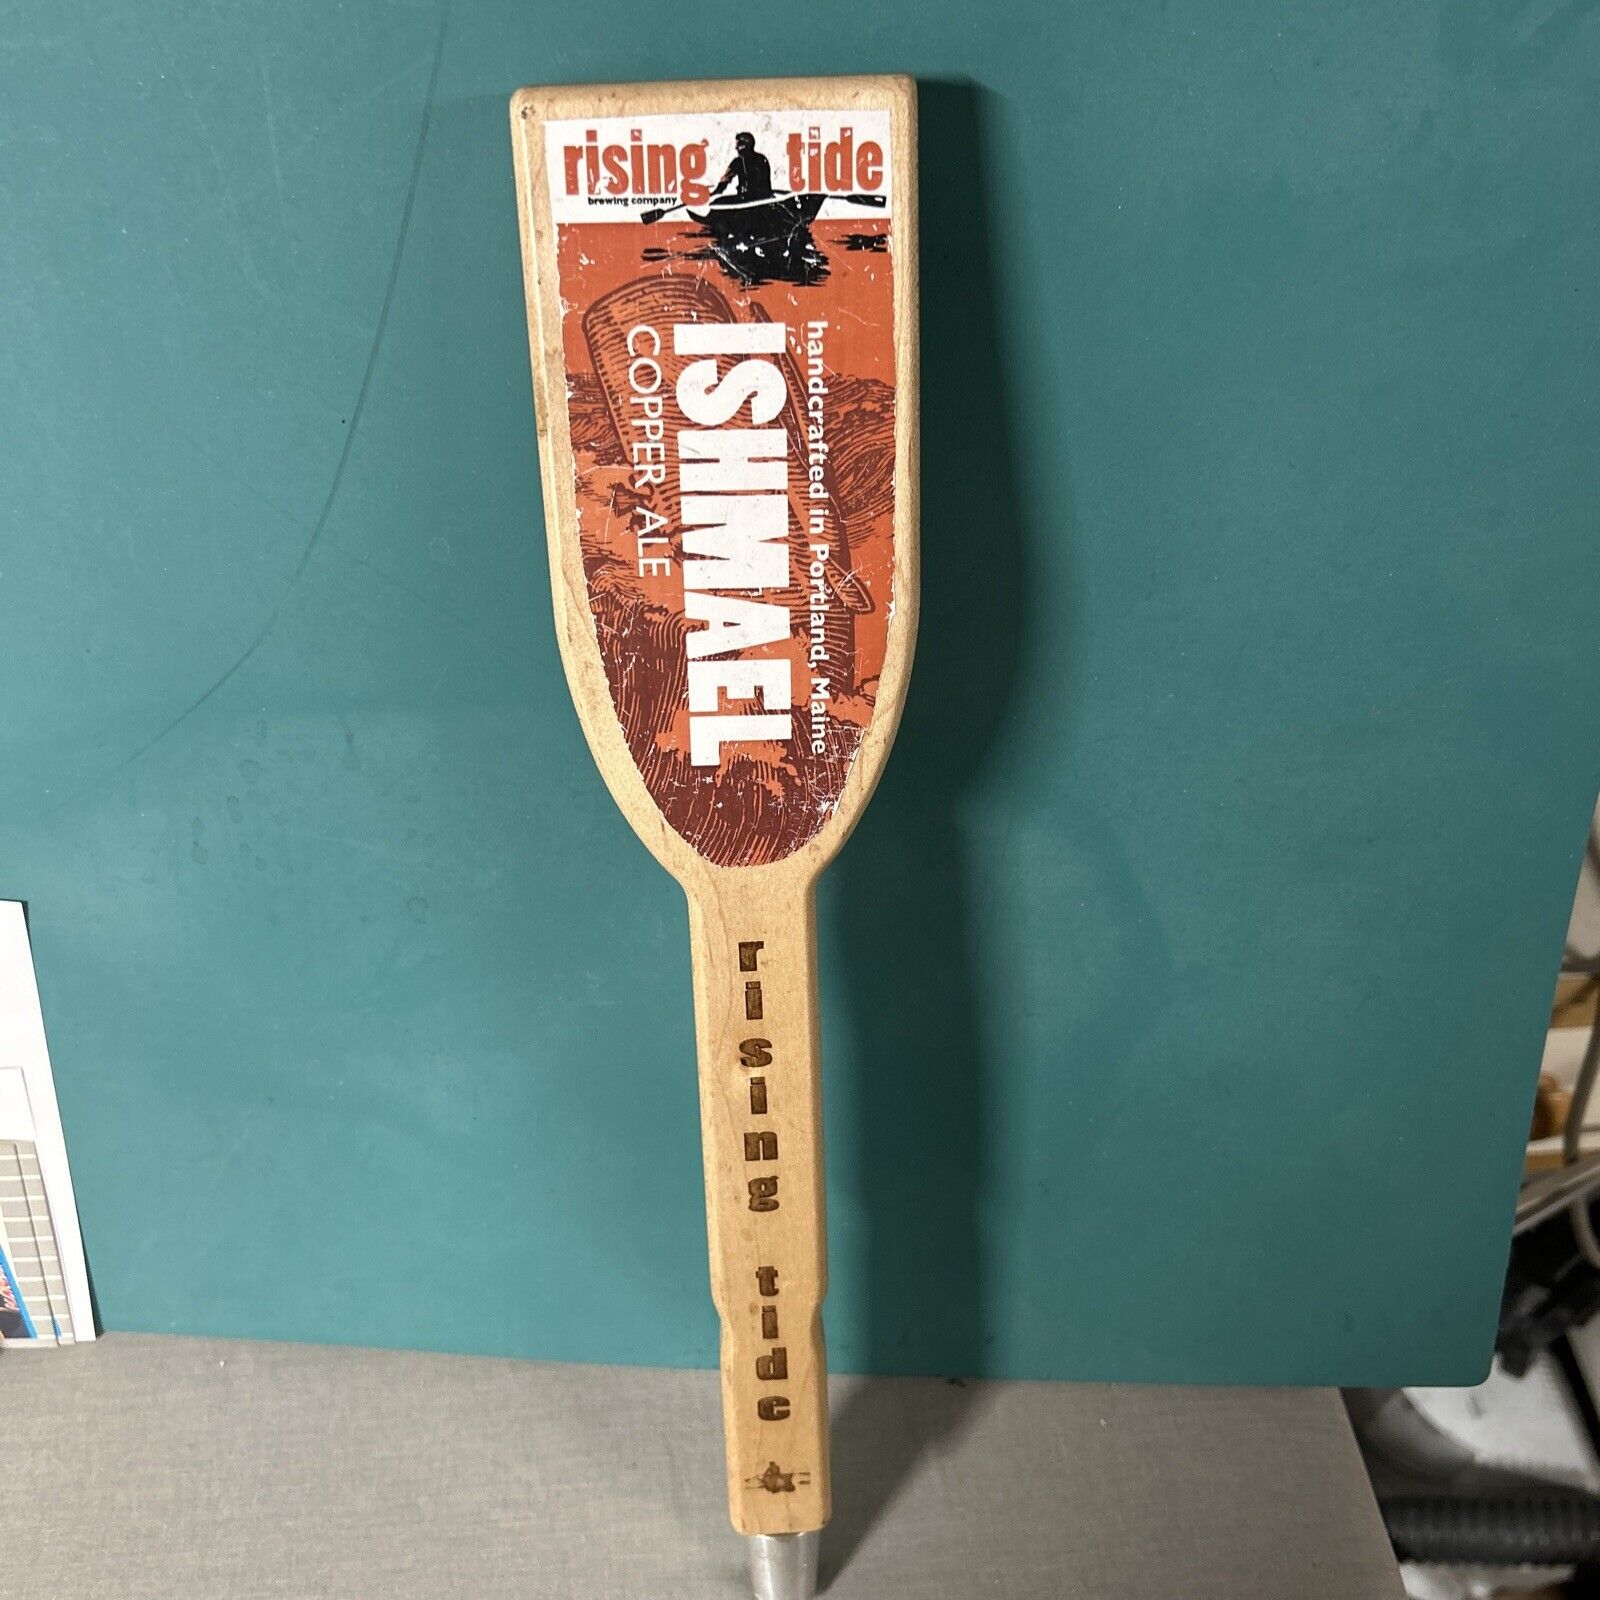 Ishmael Copper Ale Rising Tide Portland ME Wooden Beer Tap Handle Approx 13”